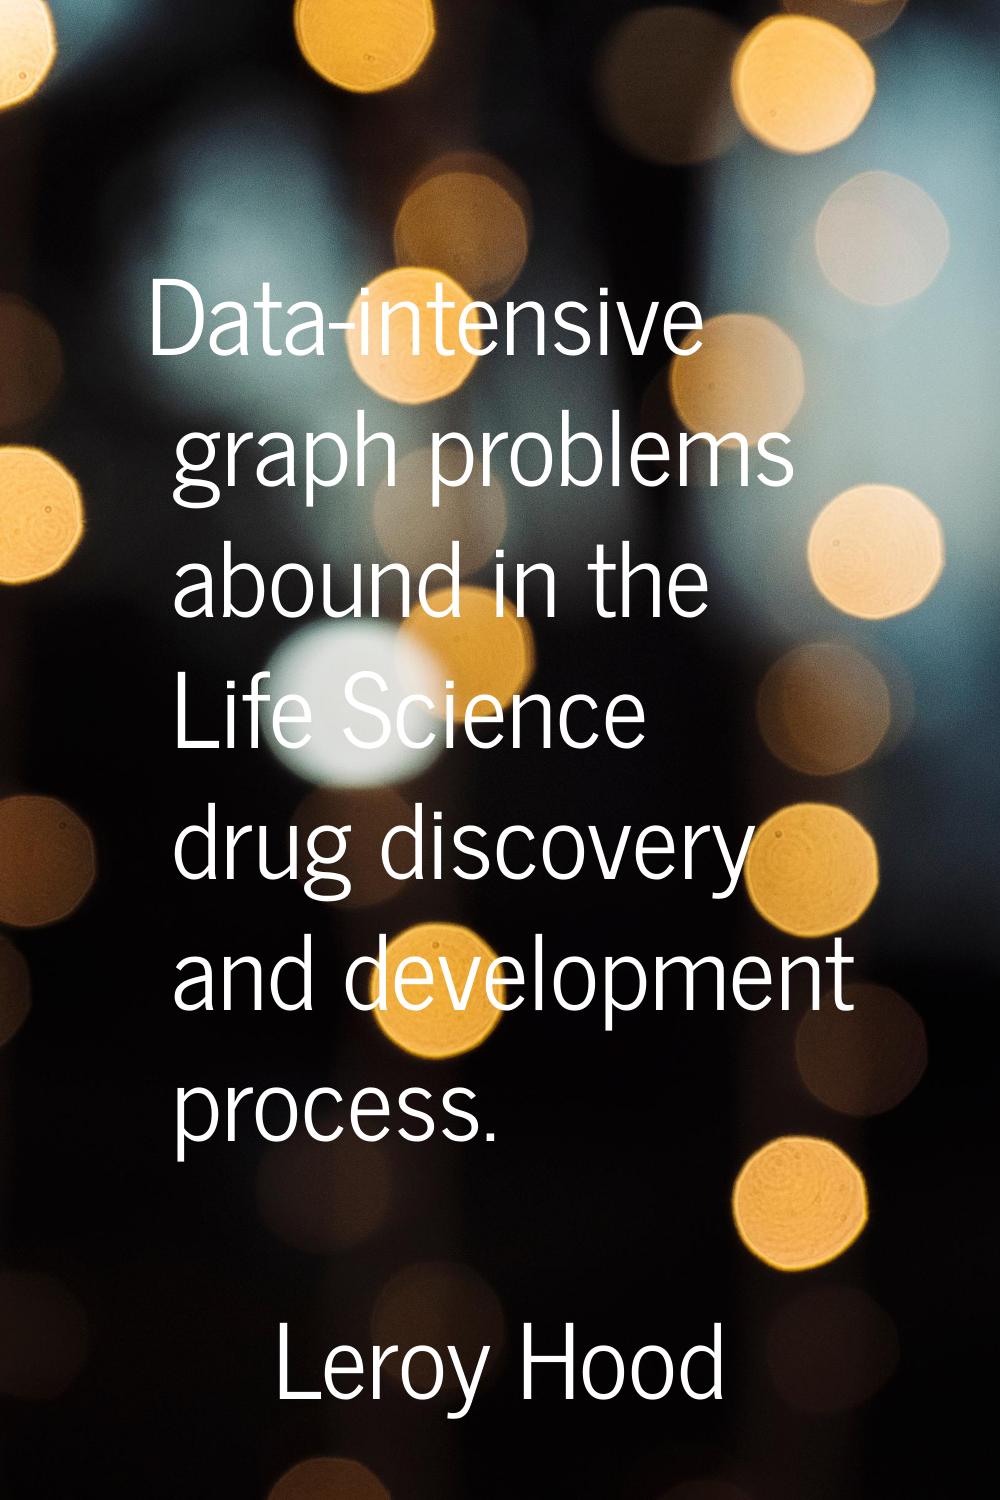 Data-intensive graph problems abound in the Life Science drug discovery and development process.